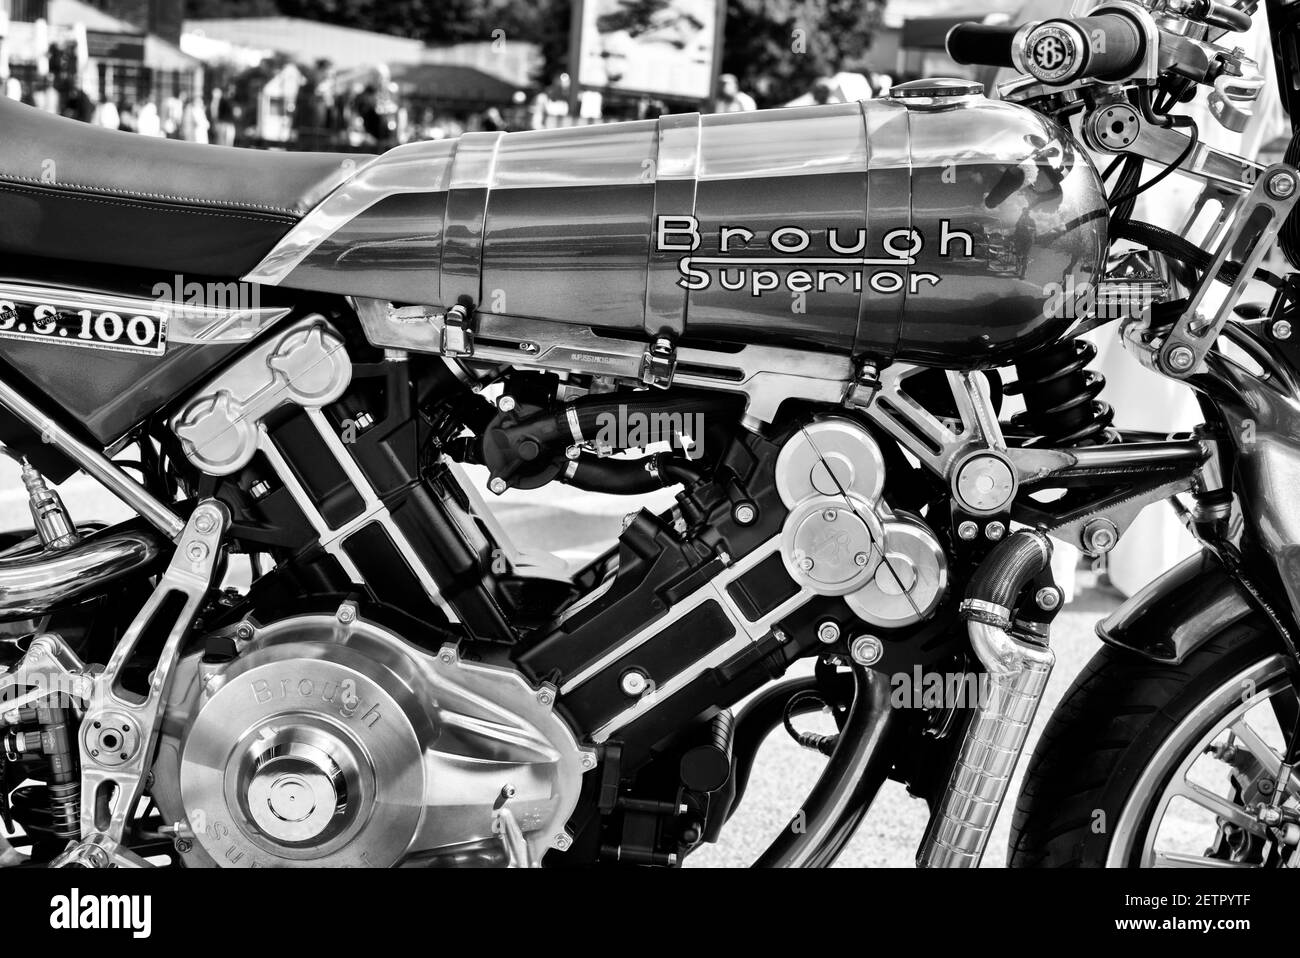 2016 Brough Superior SS100 Motorcycle. Classic British Motorcycle. Black and white Stock Photo